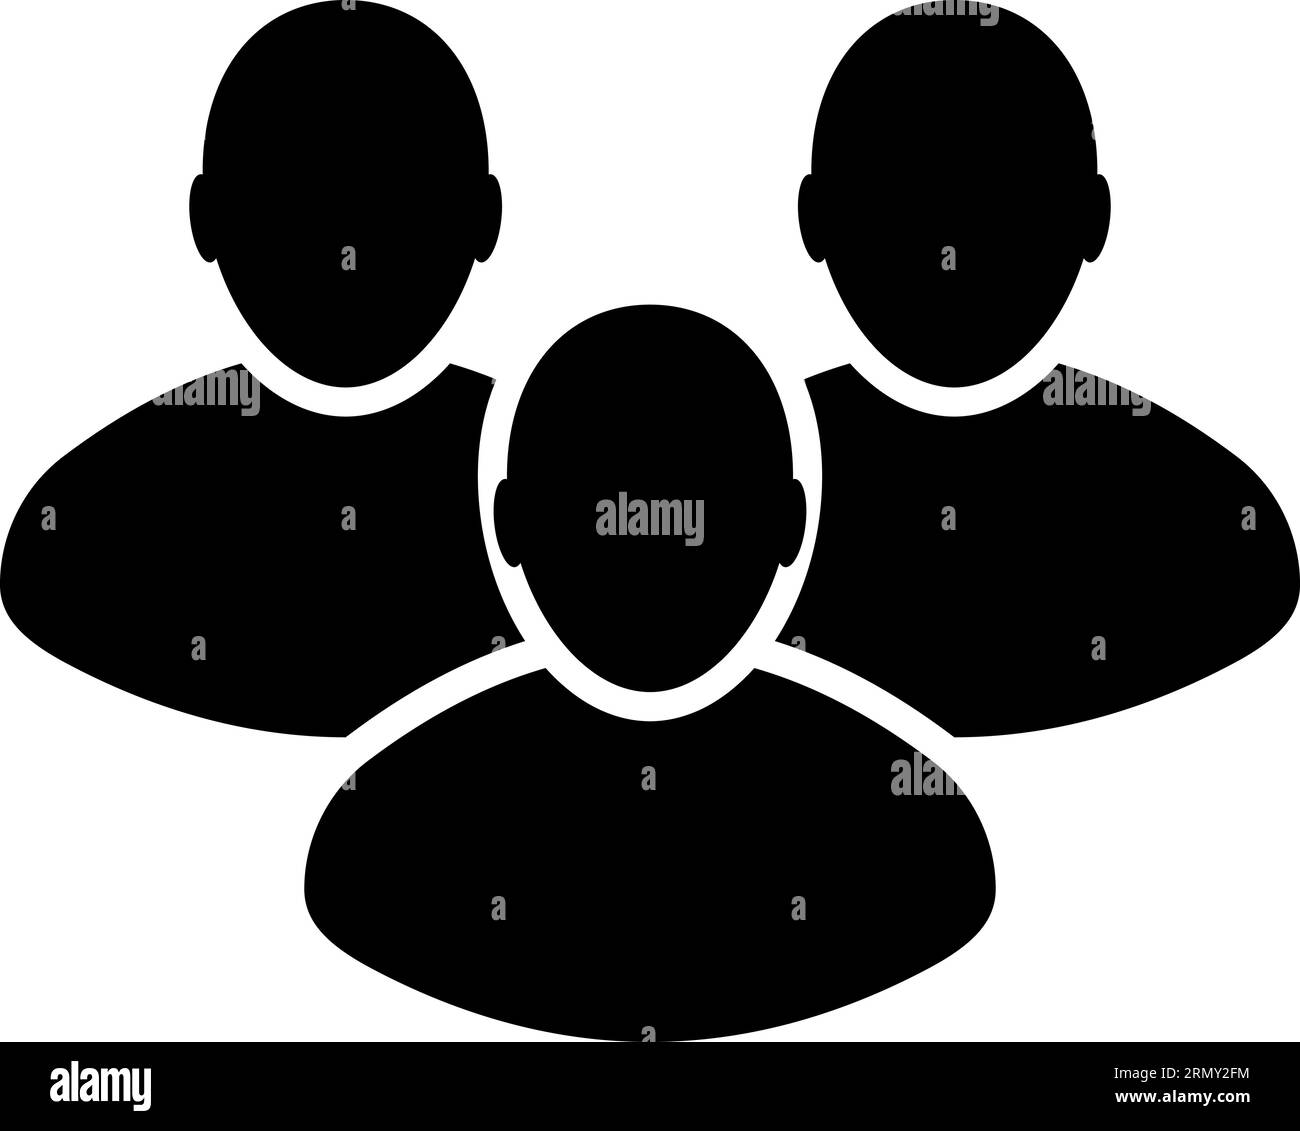 Icon 3 person groups people community concept corporate team group Stock Vector